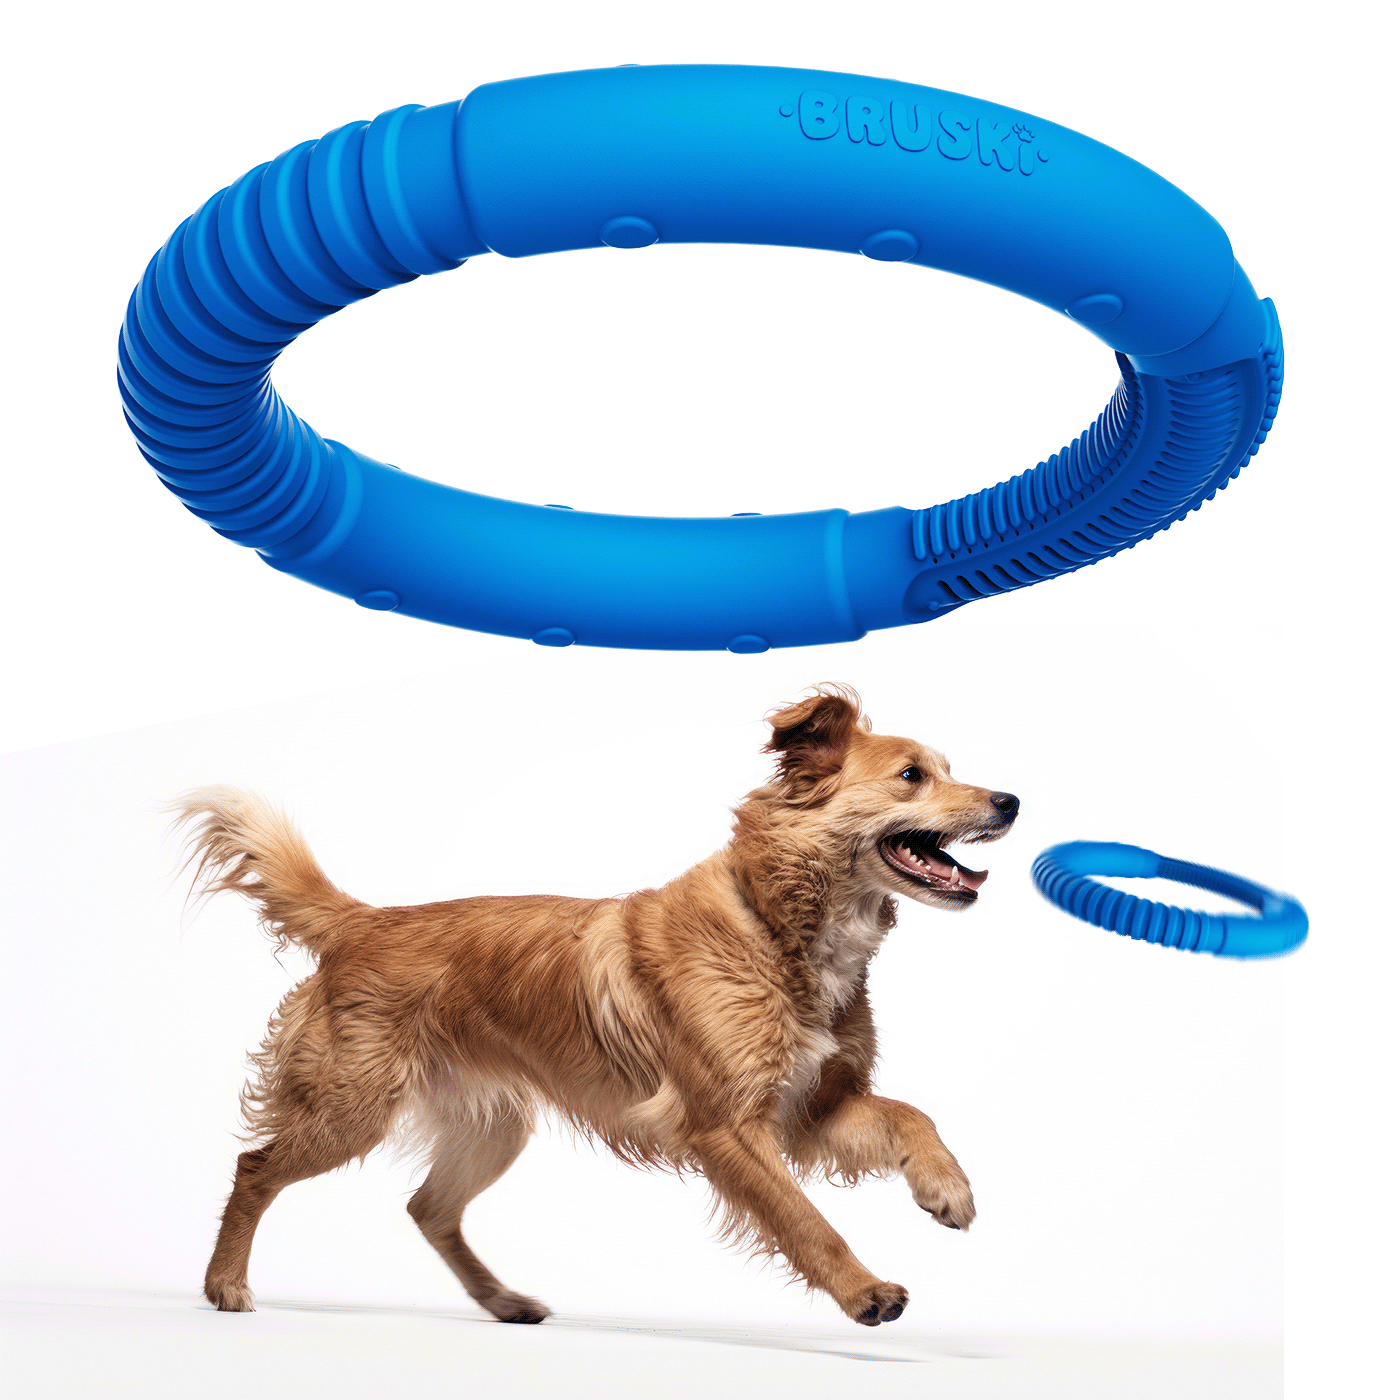 DENTALCARE industrialdesign productdesign rubber DISEÑOINDUSTRIAL dogs cattoy dogproduct dogtoy